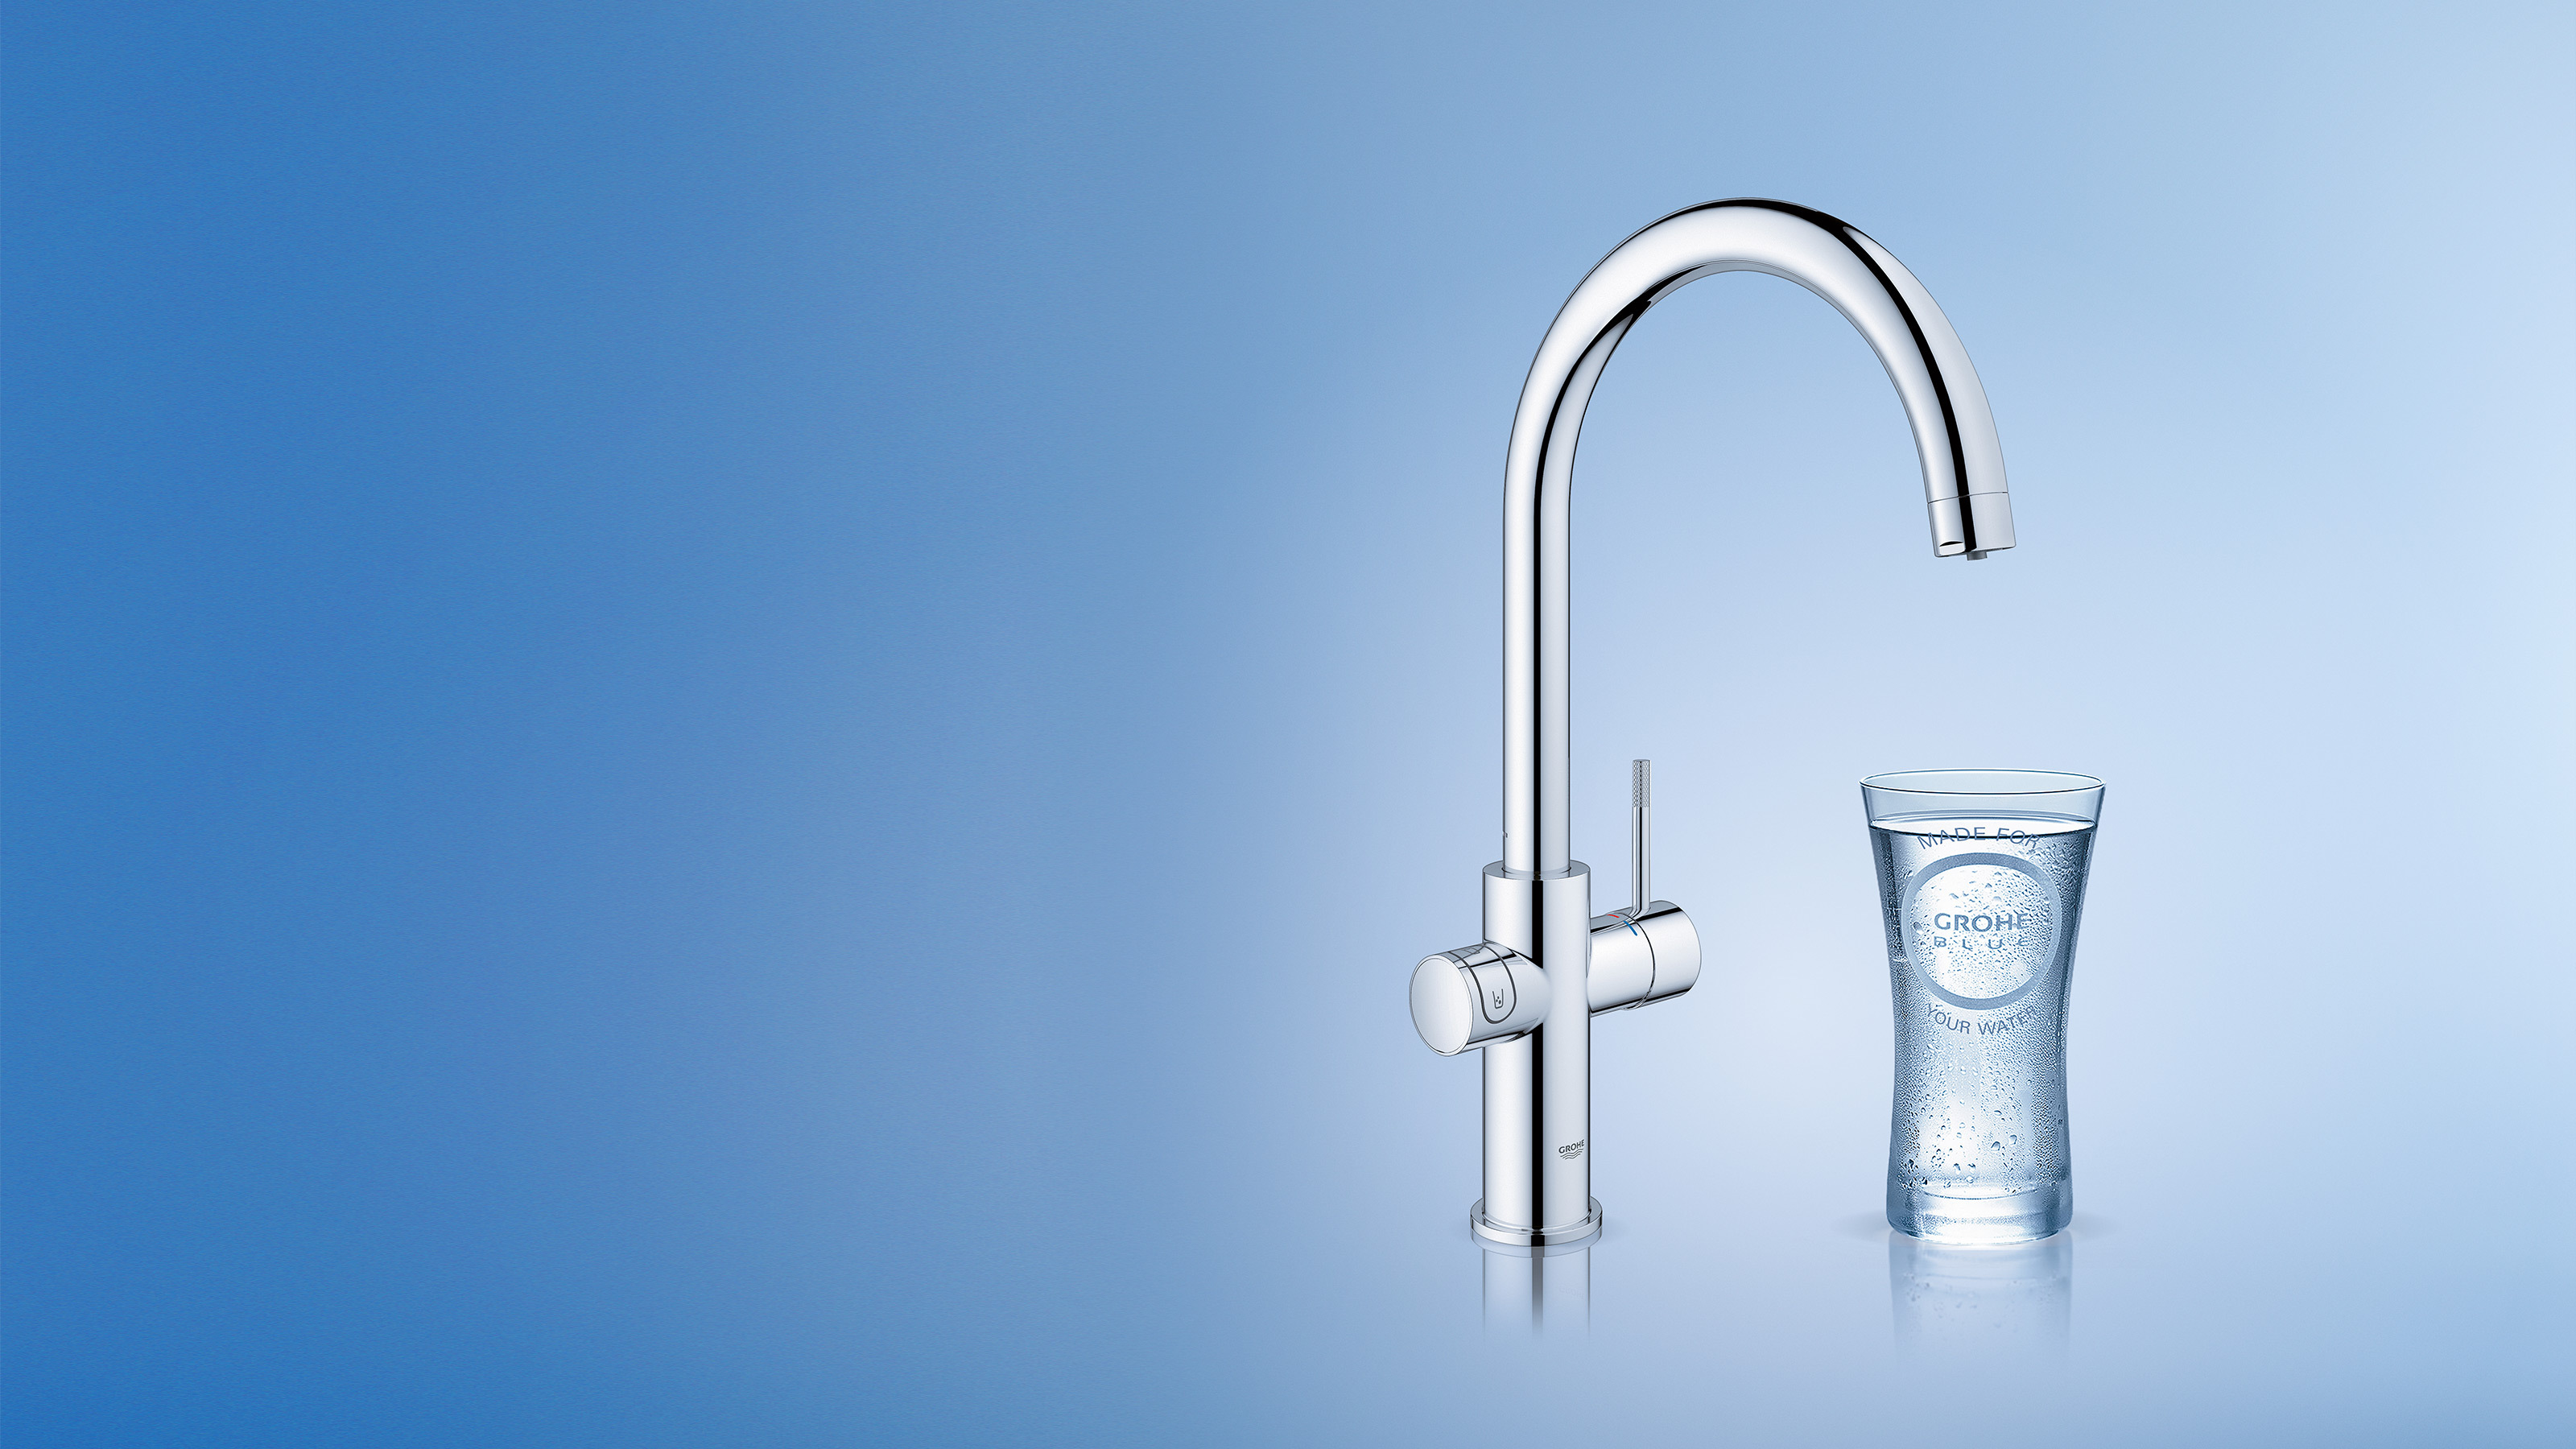 GROHE Blue Home - 100% taste. Chilled, still or sparkling water.